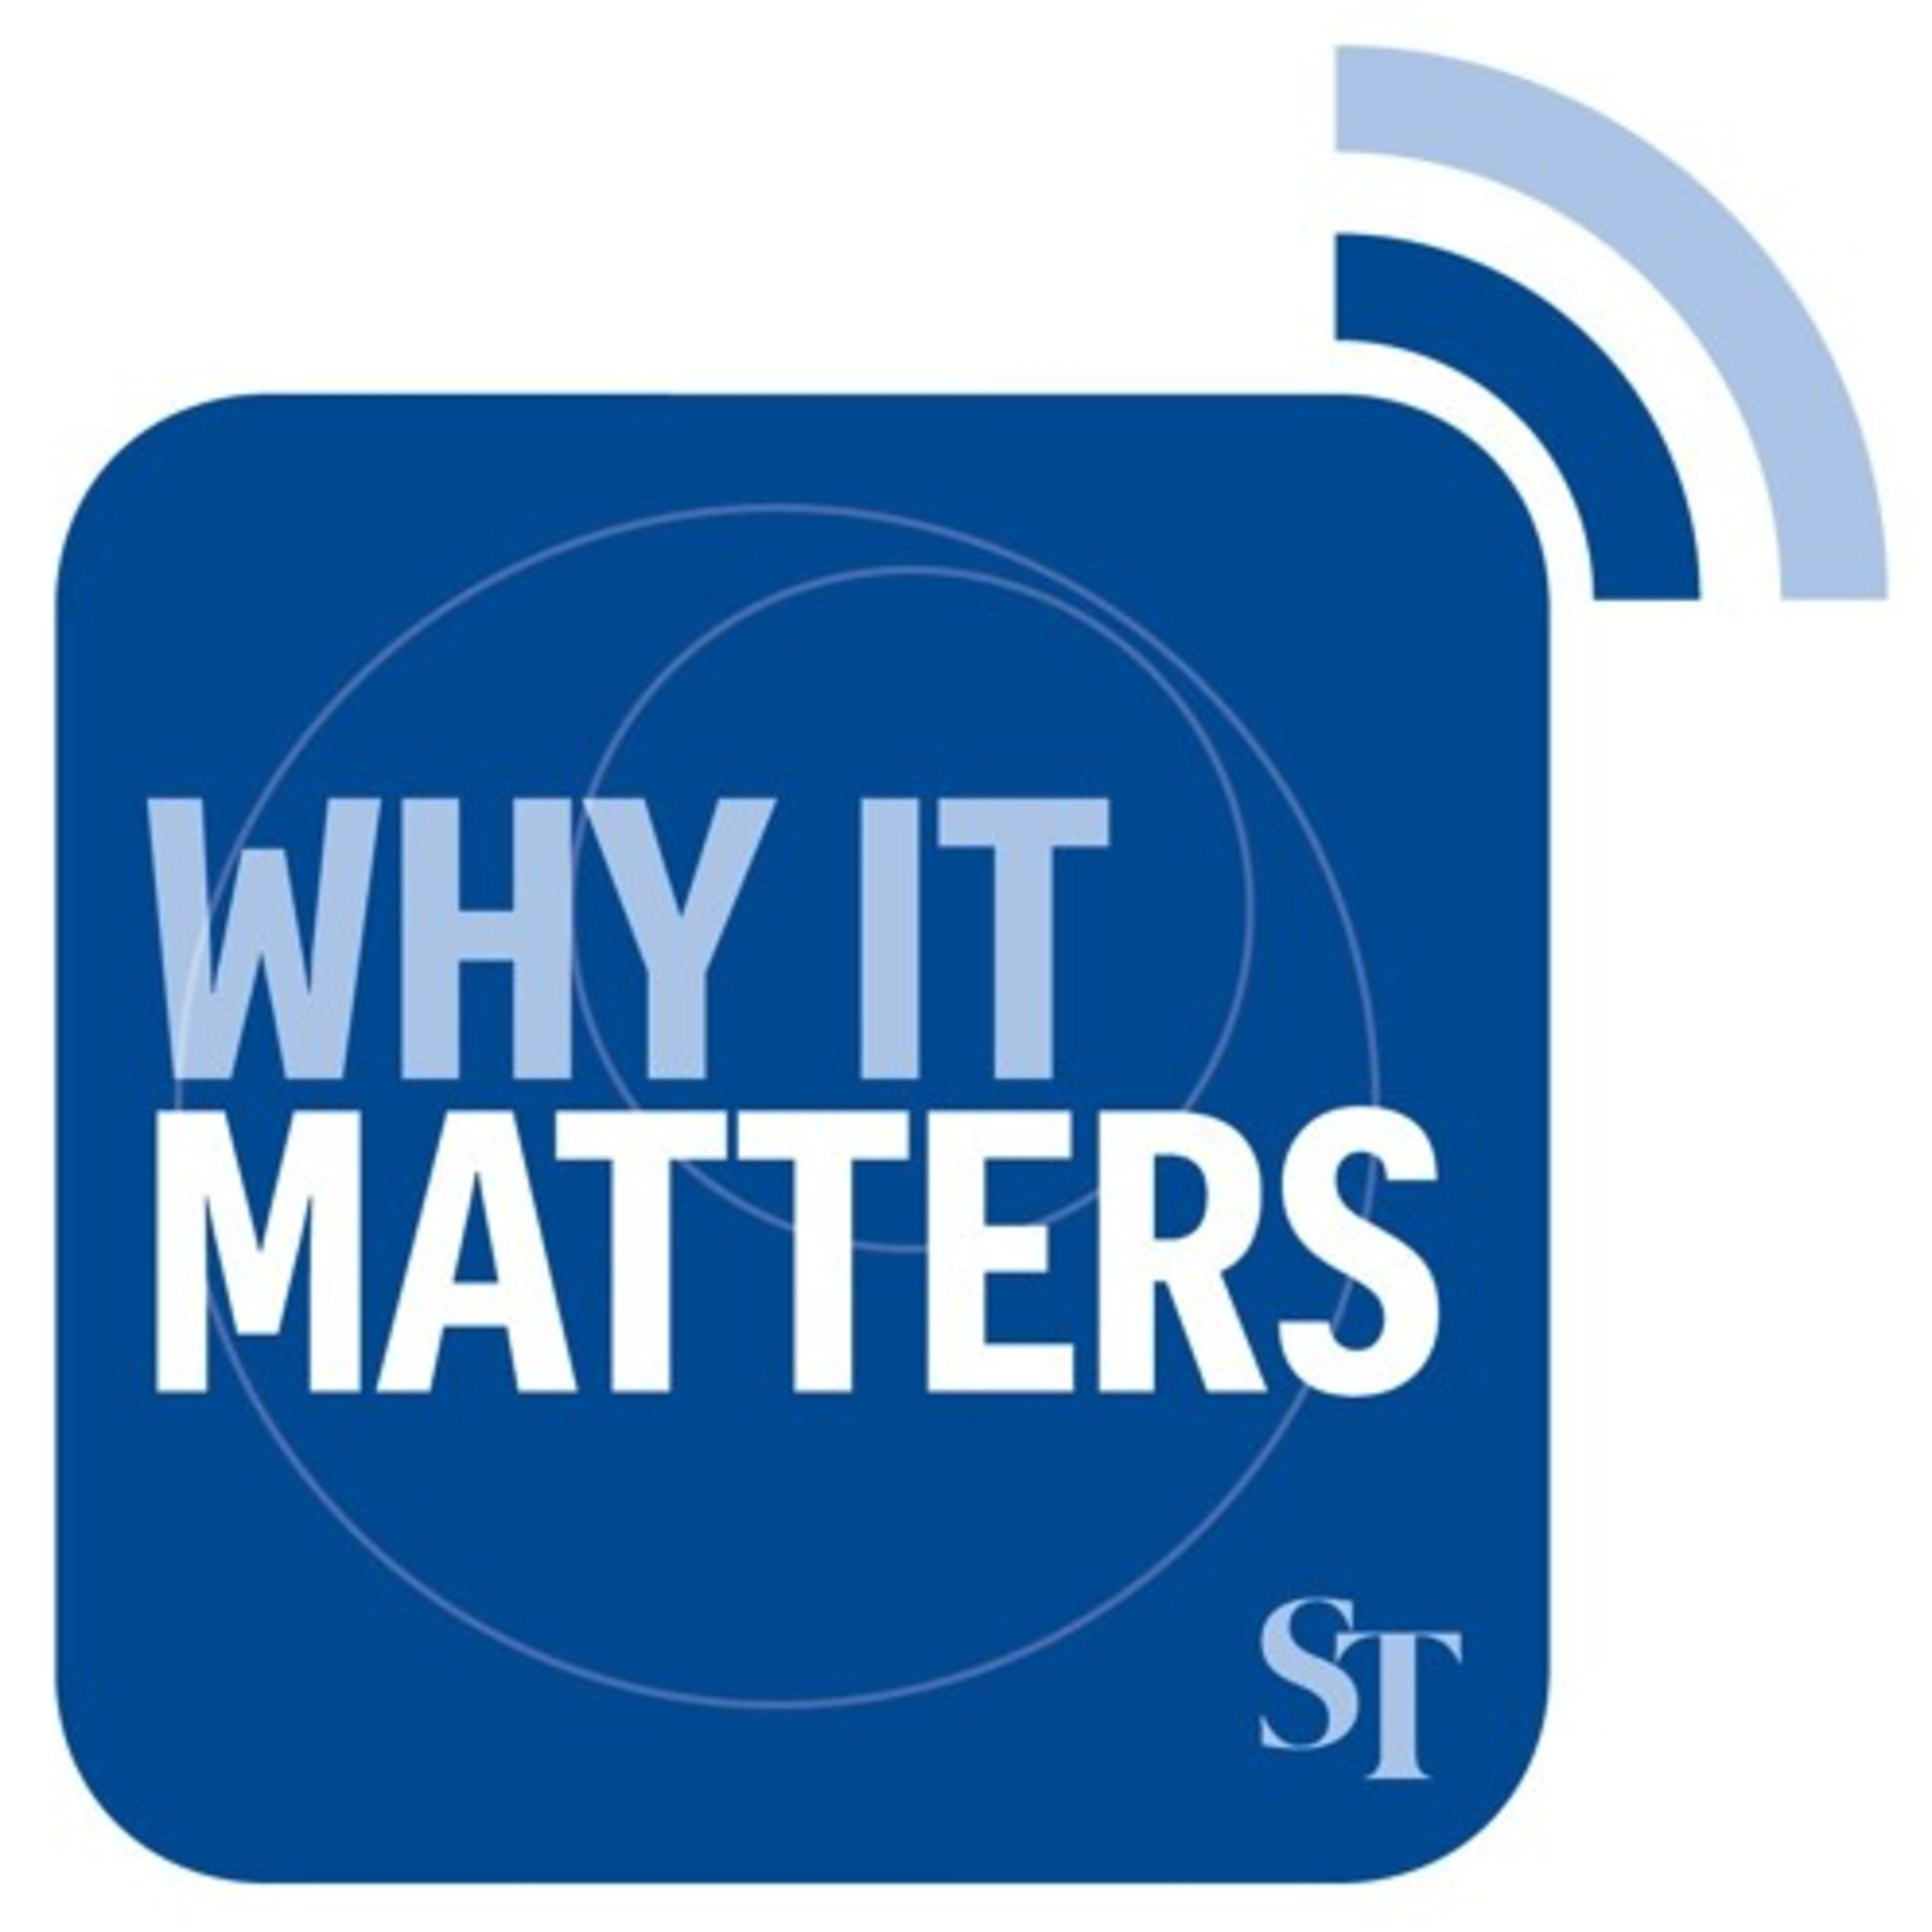 Why It Matters EP 2: What the Trump-Kim summit (if it happens) means for Singapore